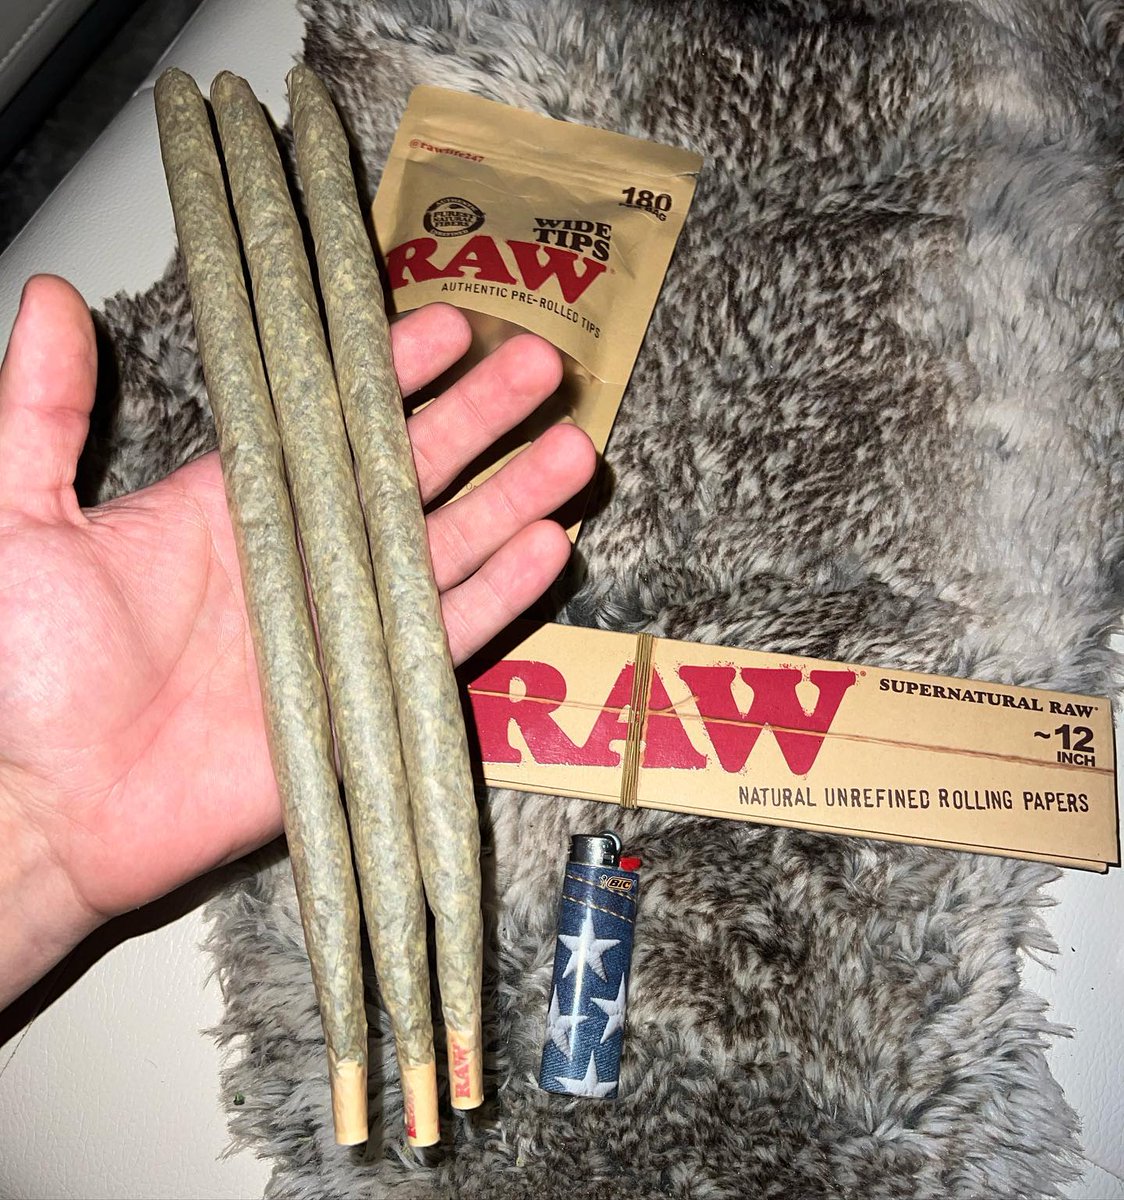 Raw boyz for life 😎  
#exotics #lover #strains #daily #women #models #hype #hypestrains #indoorplants #indoorgarden #club  #stoned #love #nature #myacgrow #angrown #roots #greatwhiteroots #growyourown #plantcommunity